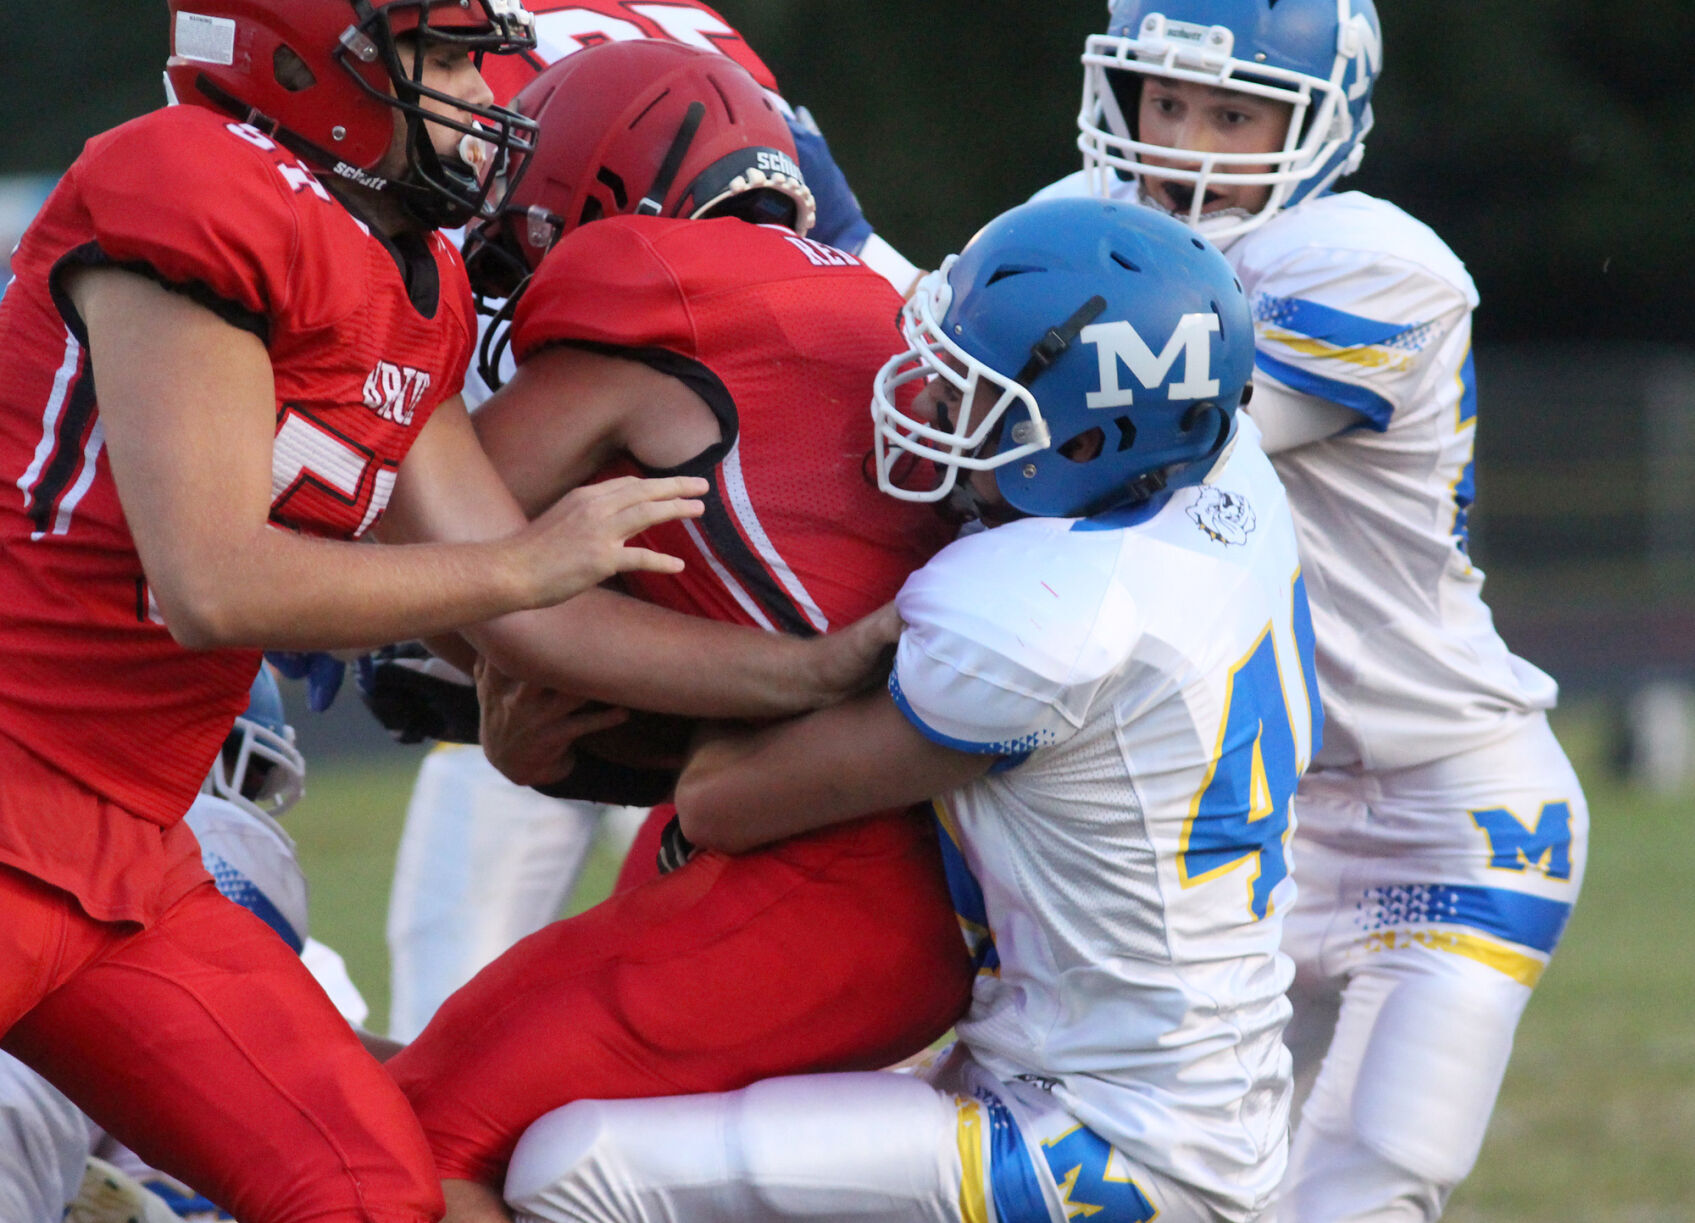 Unbeaten McDonell to host winless Cornell for homecoming